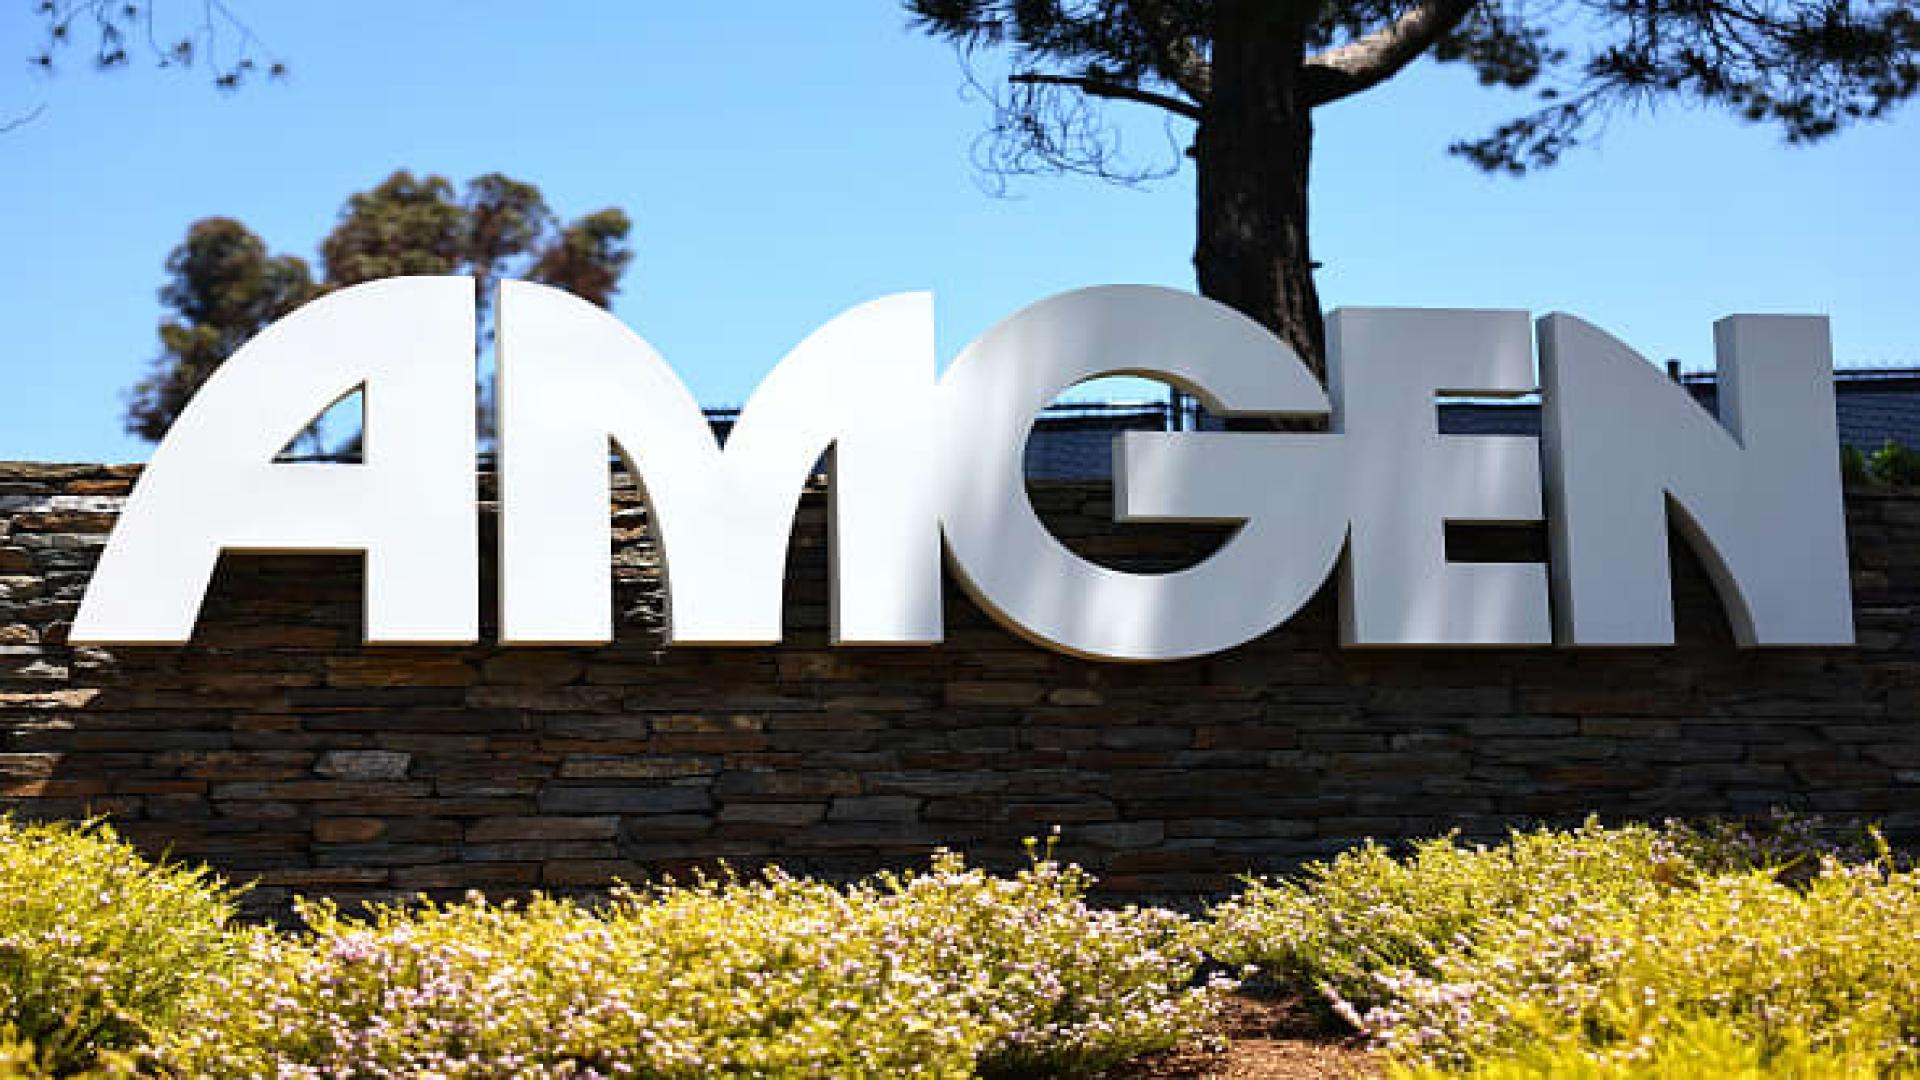 Amgen scraps experimental weight loss pill, moves forward with injection